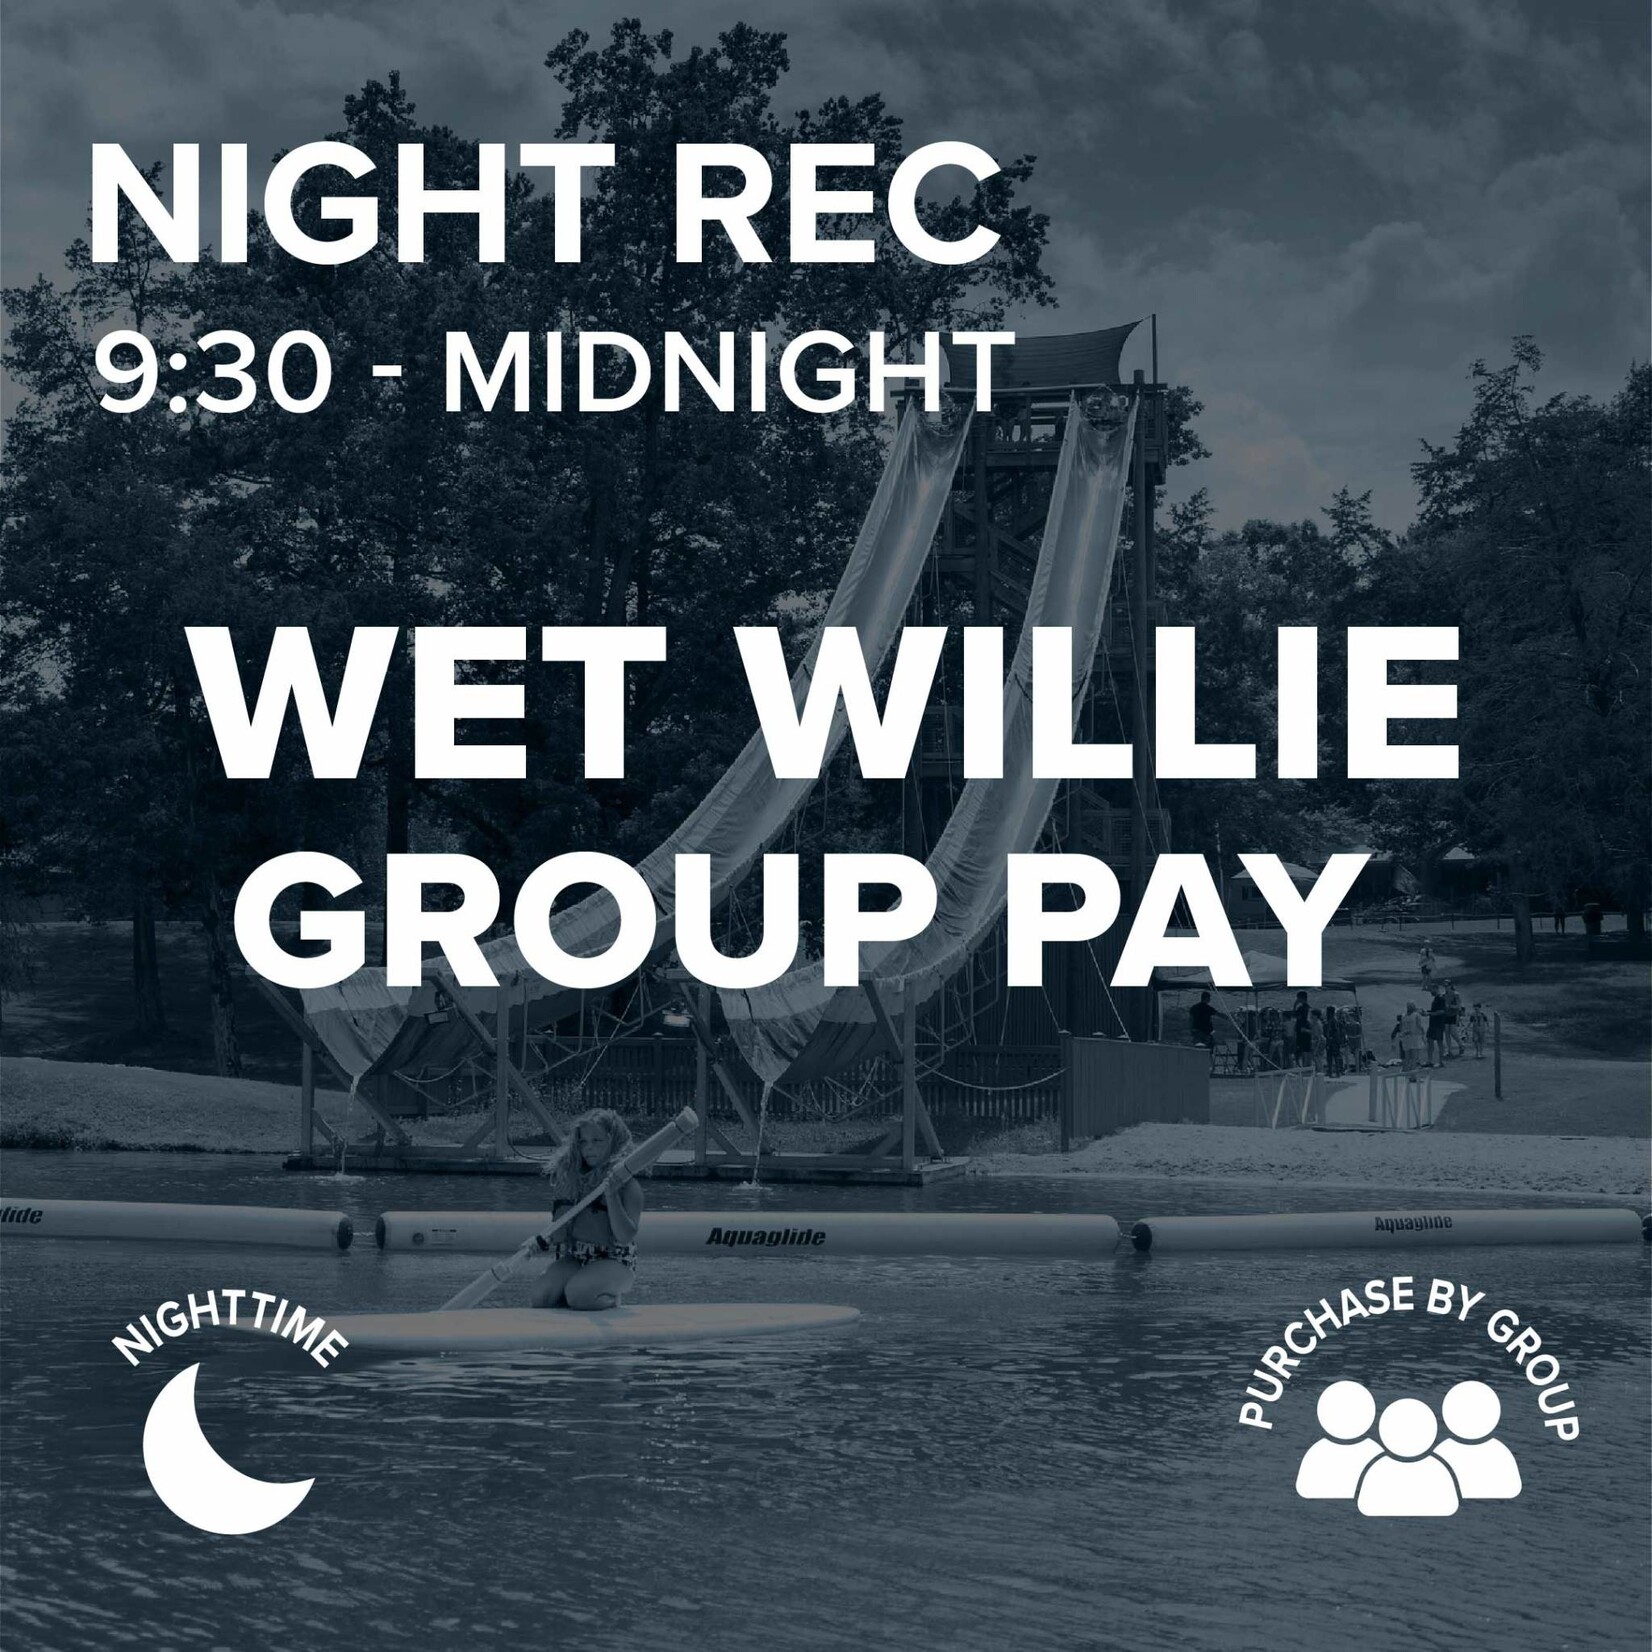 2024 Student Life Youth Camp 2 June 3-June 7 Wet Willie Group Pay SLY2 2024 NIGHTTIME ALL